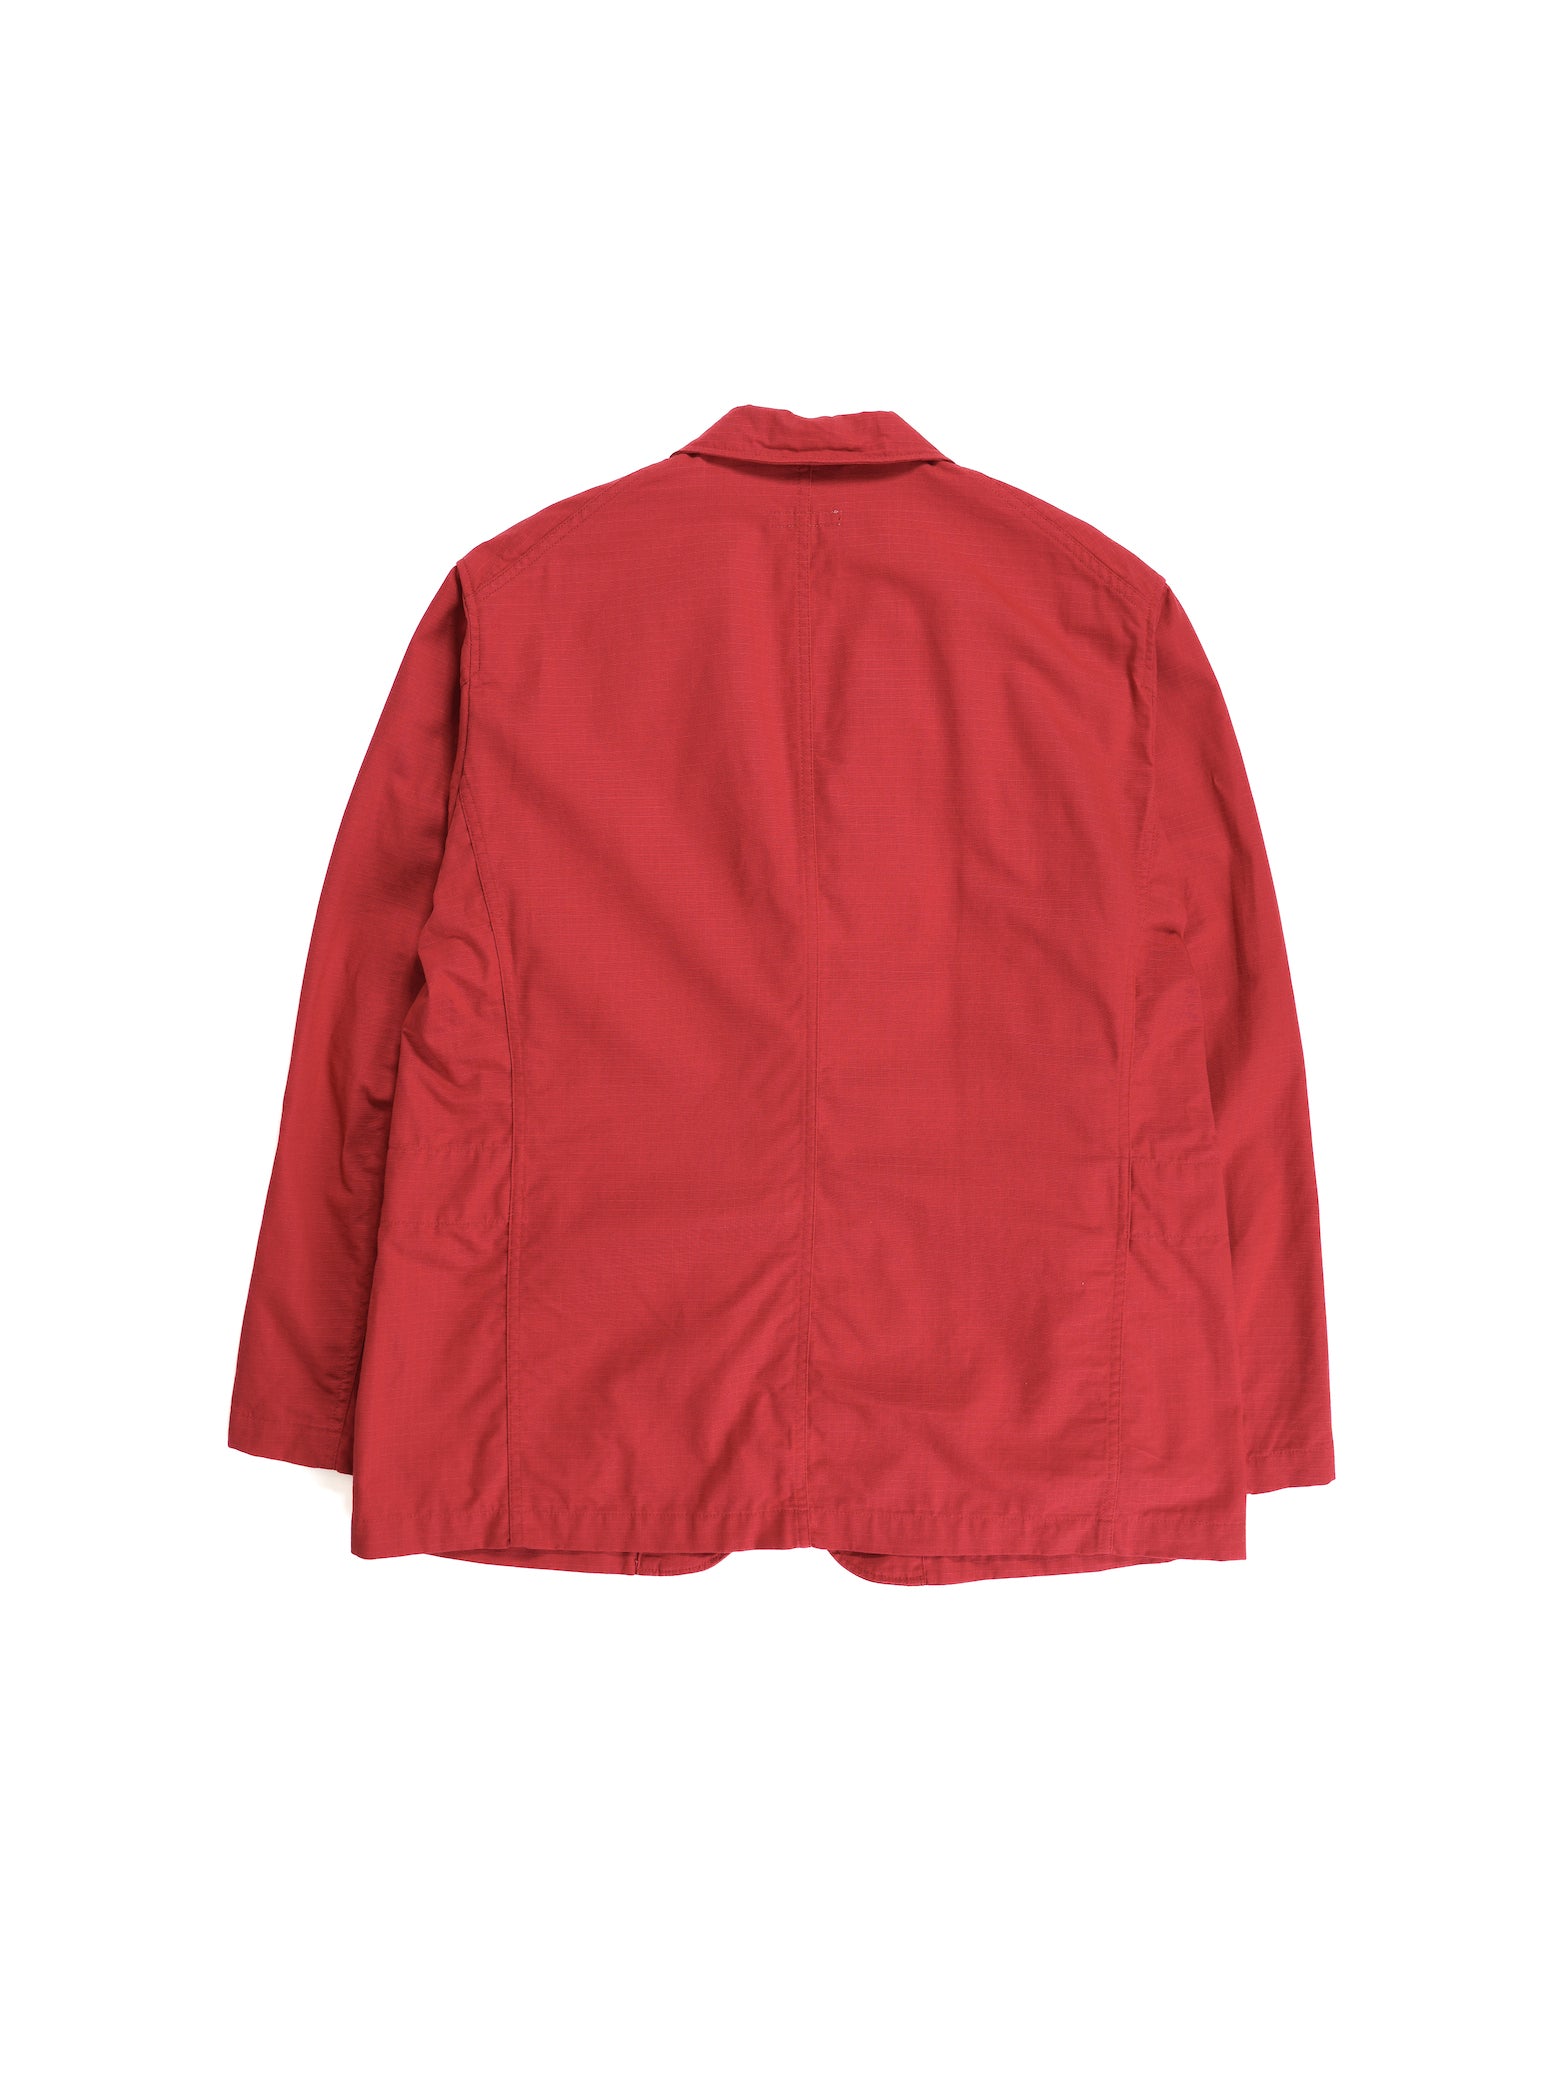 Bedford Jacket - Red Cotton Ripstop